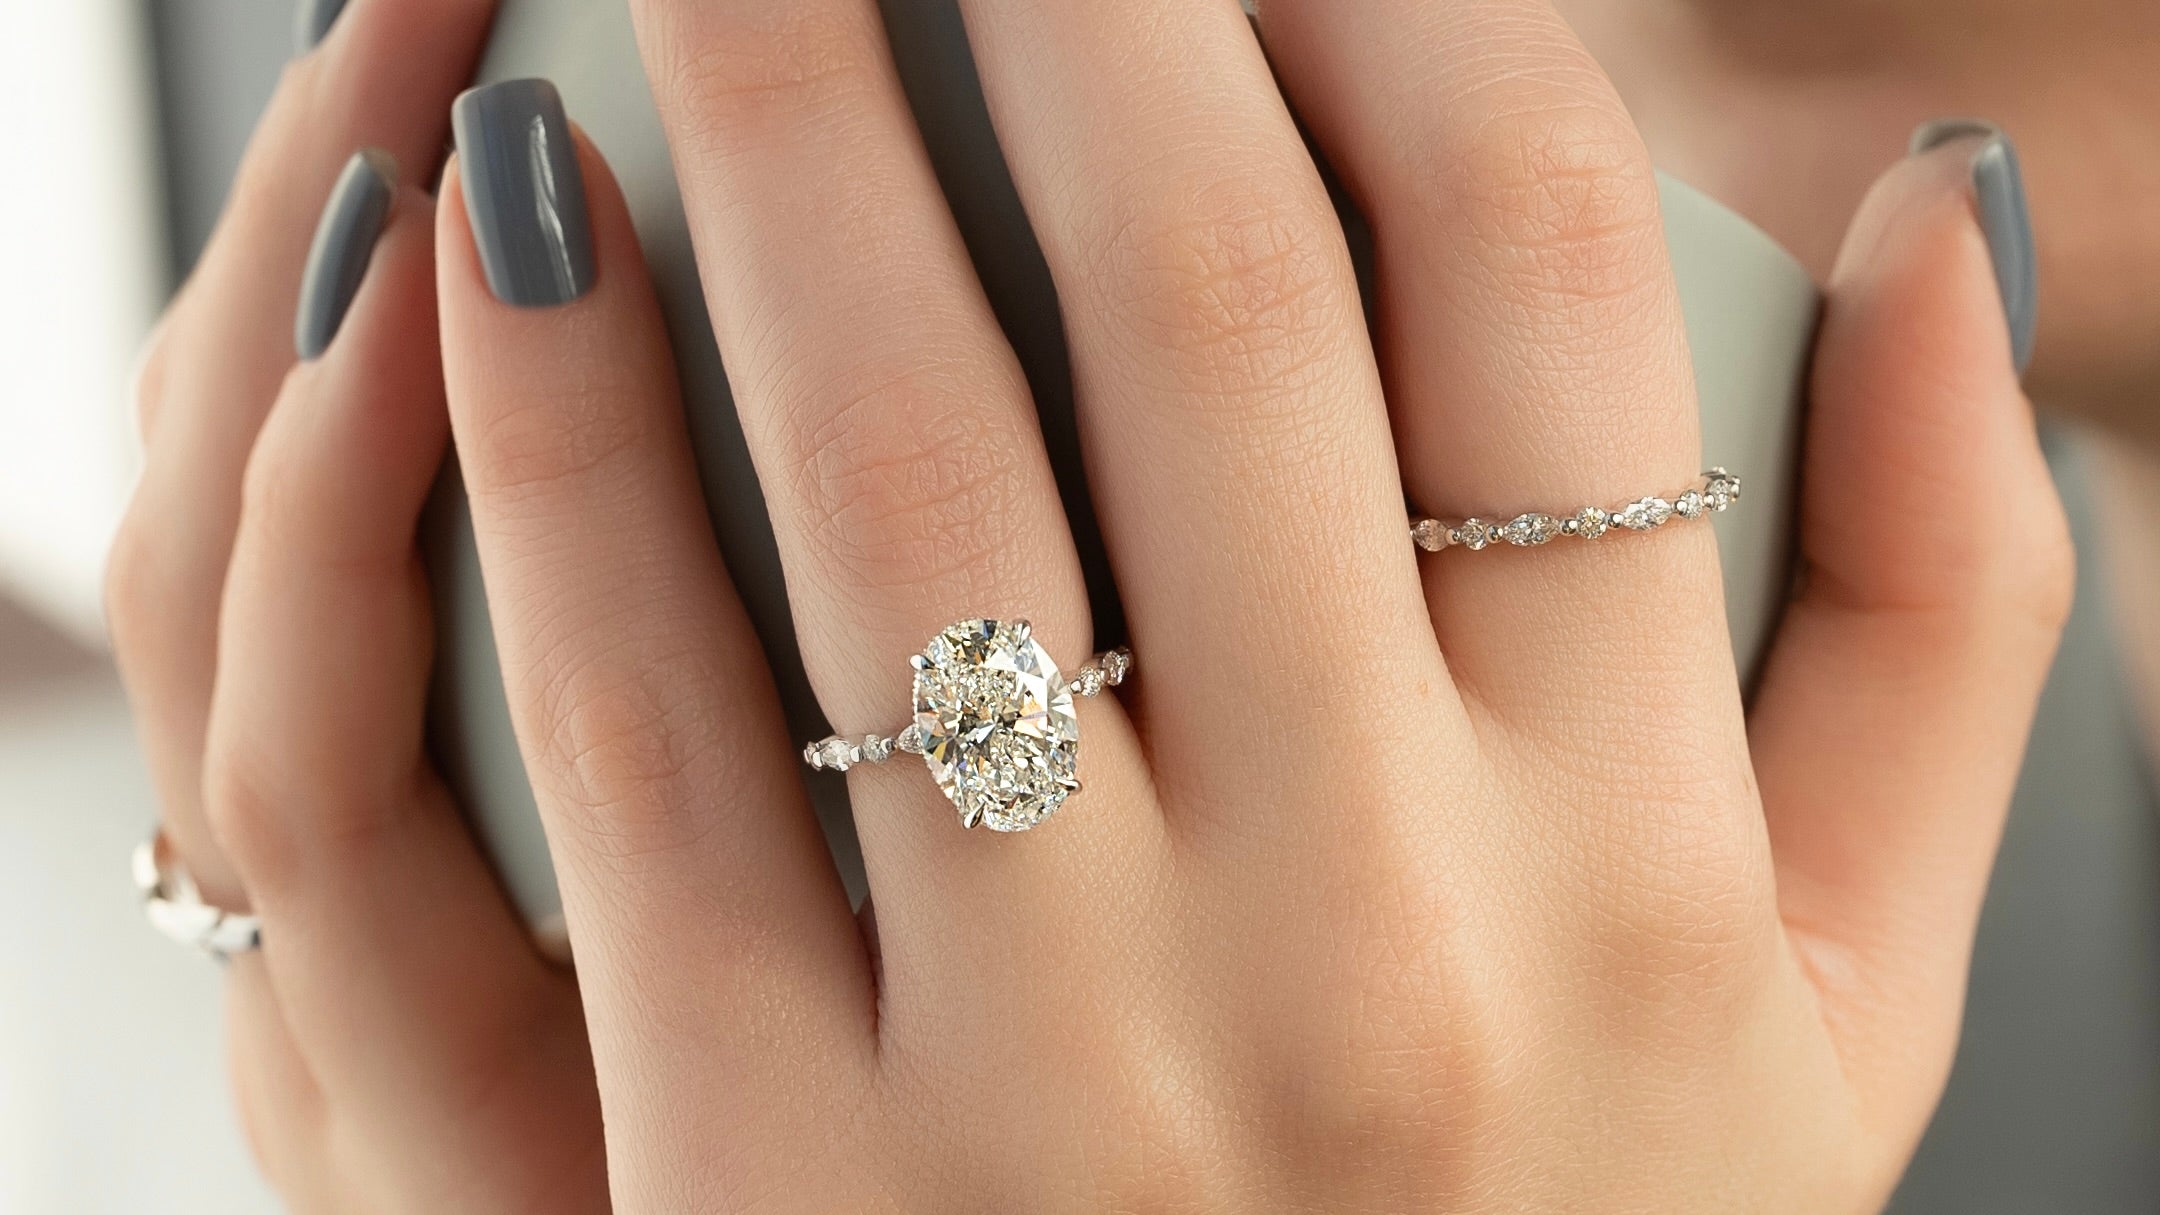 Ring Royalty: Exquisite $10K Engagement Rings